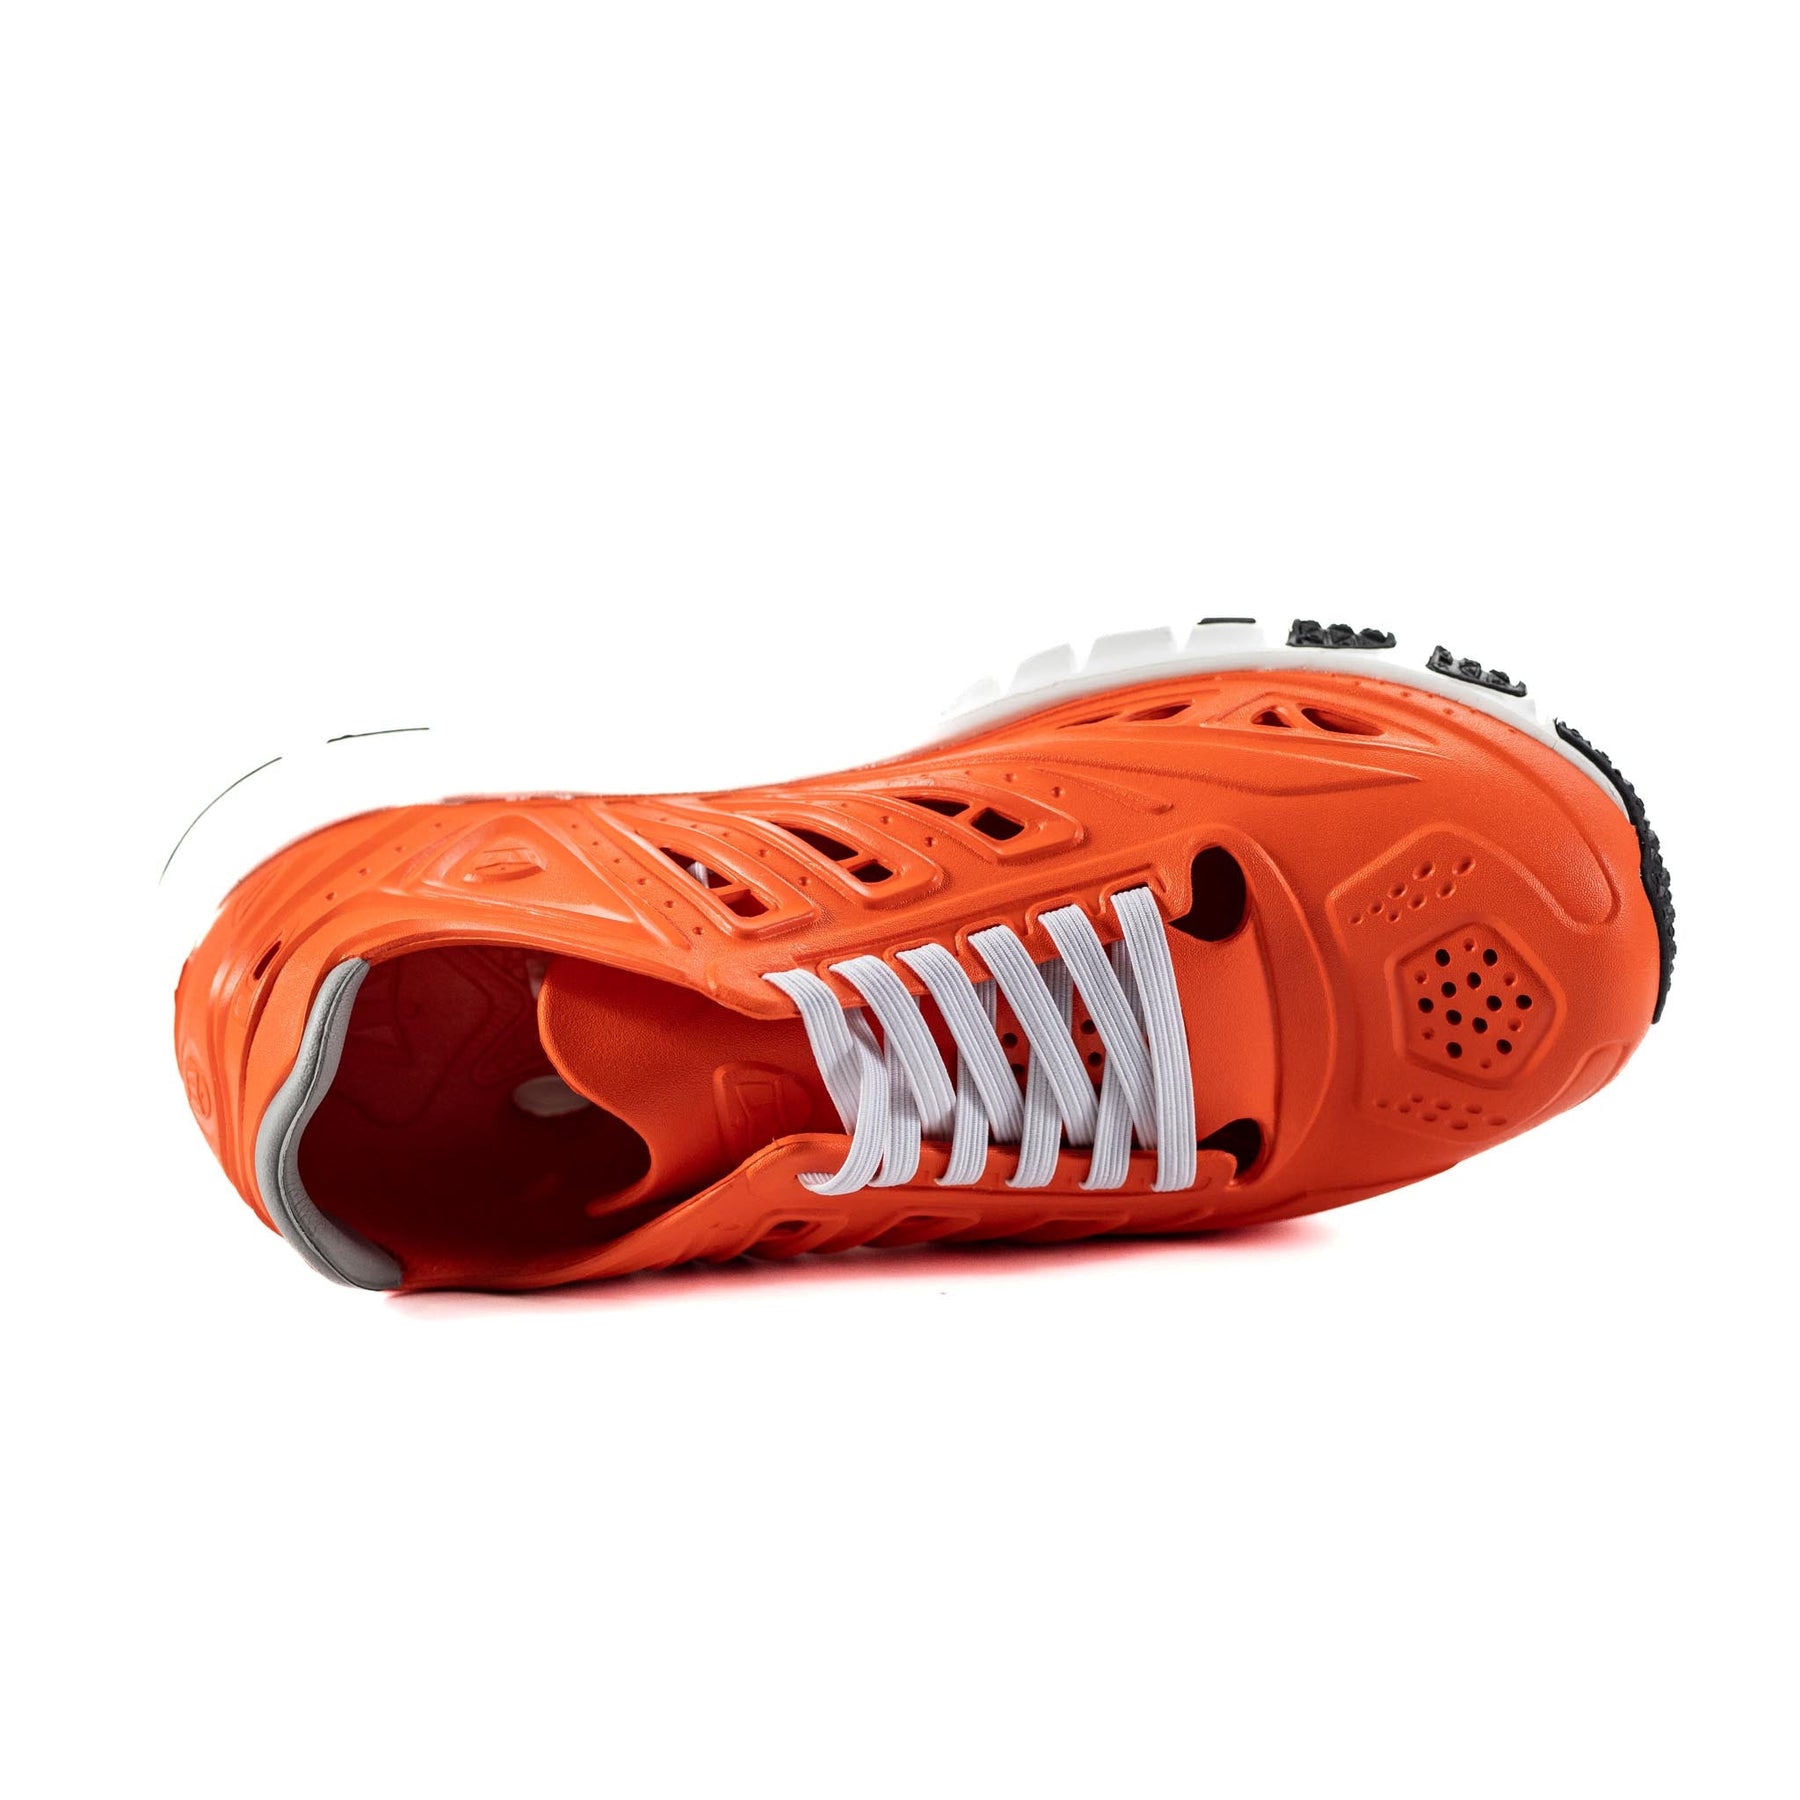 APX Closed Toe Lace Up Water Shoes for Women by CROSSKIX - Sportsman Gear